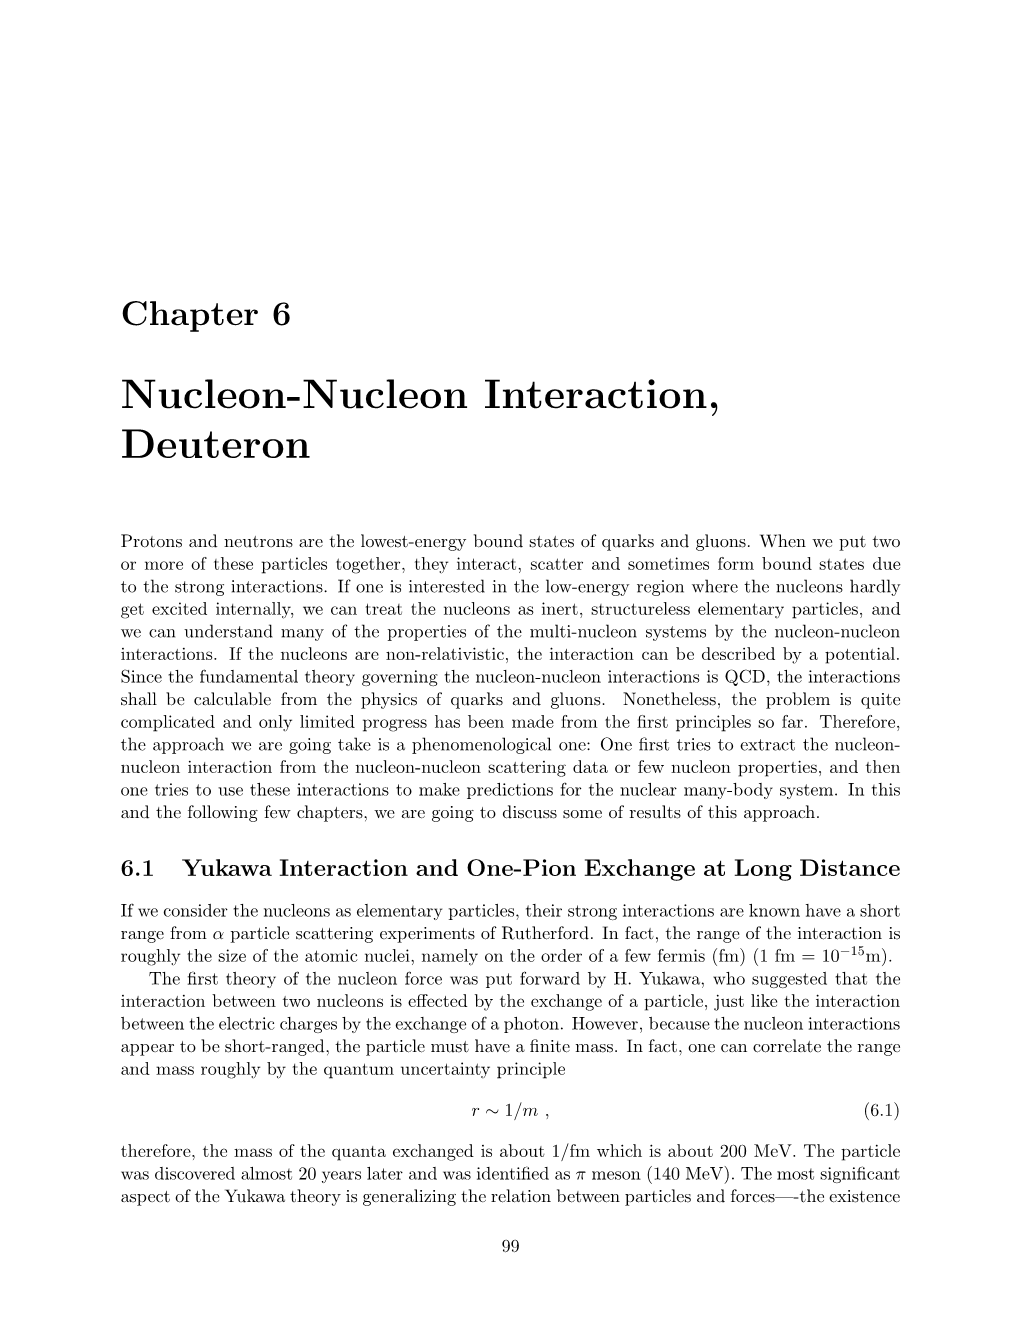 Chapter 6: Nucelon-Nucleon Interactions and Deuteron